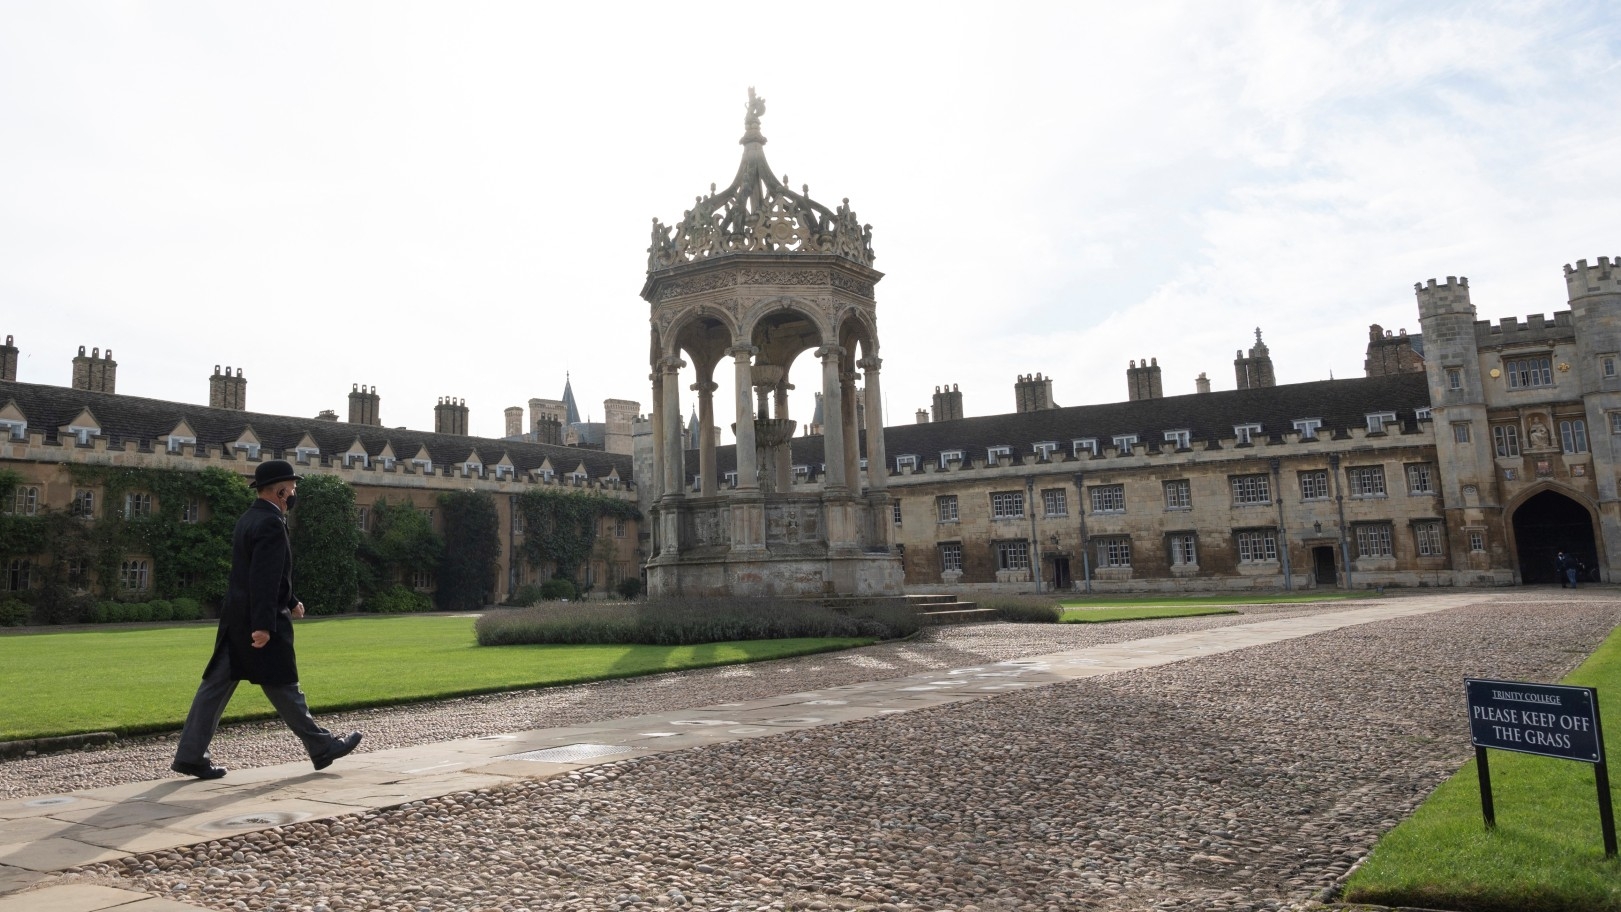 A porter walks across the Great Court at Trinity College, part of the University of Cambridge, on 14 October 2020 (AFP)